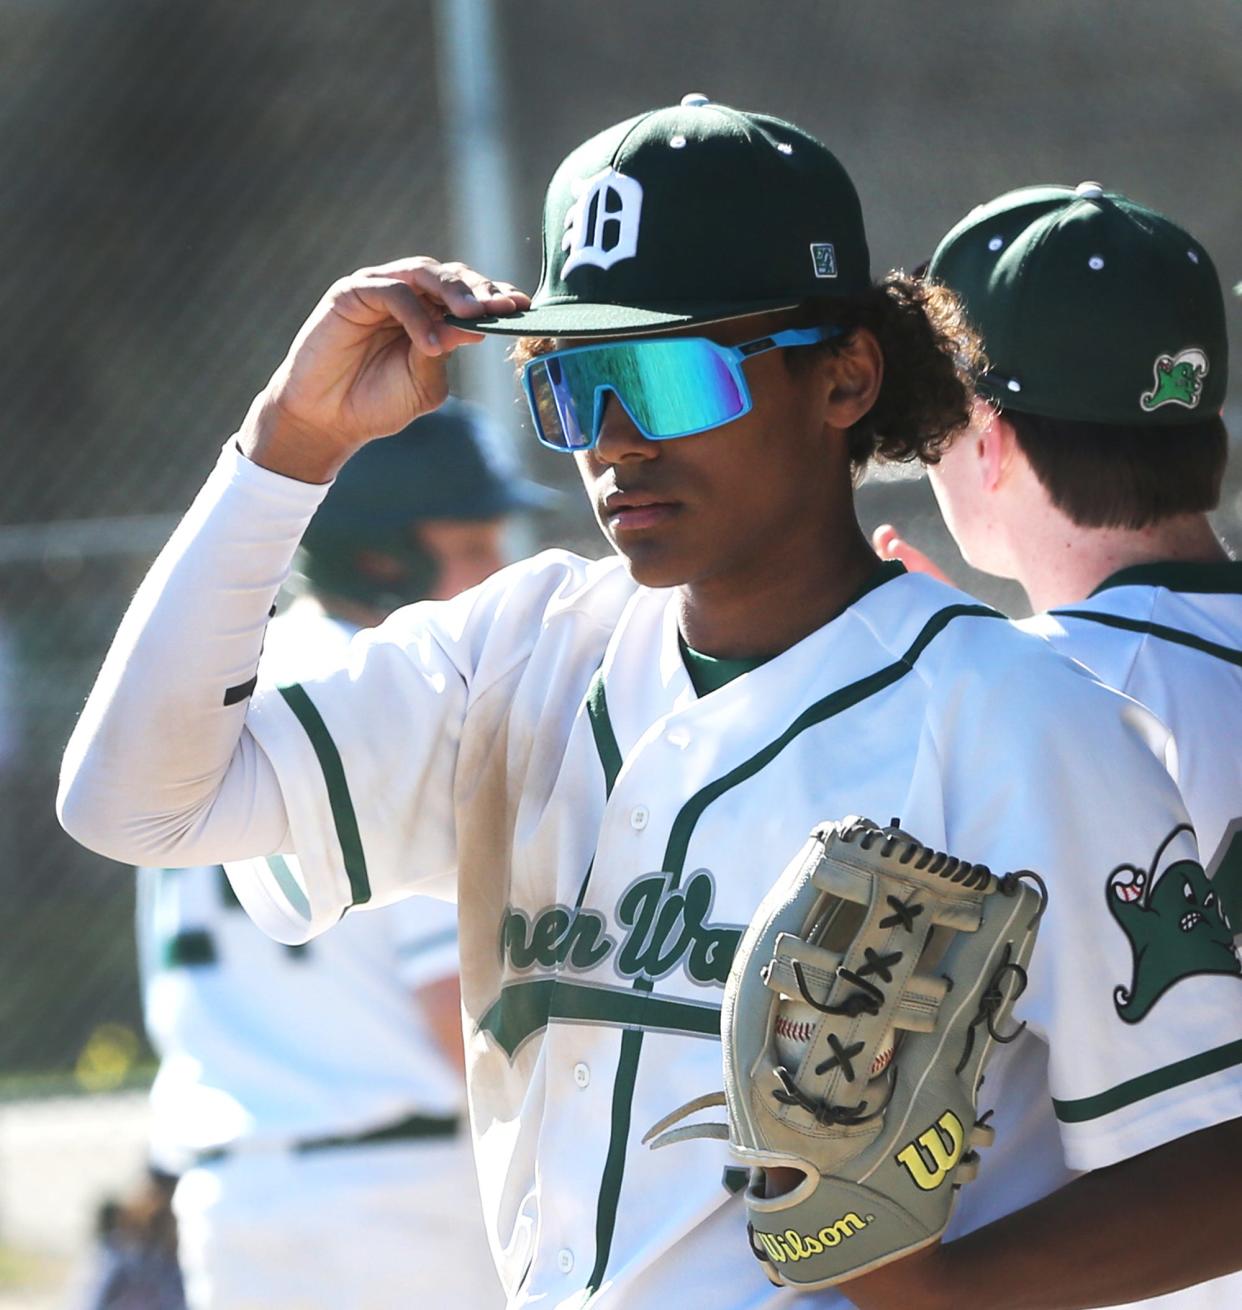 Dover High School freshman center fielder Amari Lewis is shining in the field, at the plate and on the basepaths this season for the Green Wave.